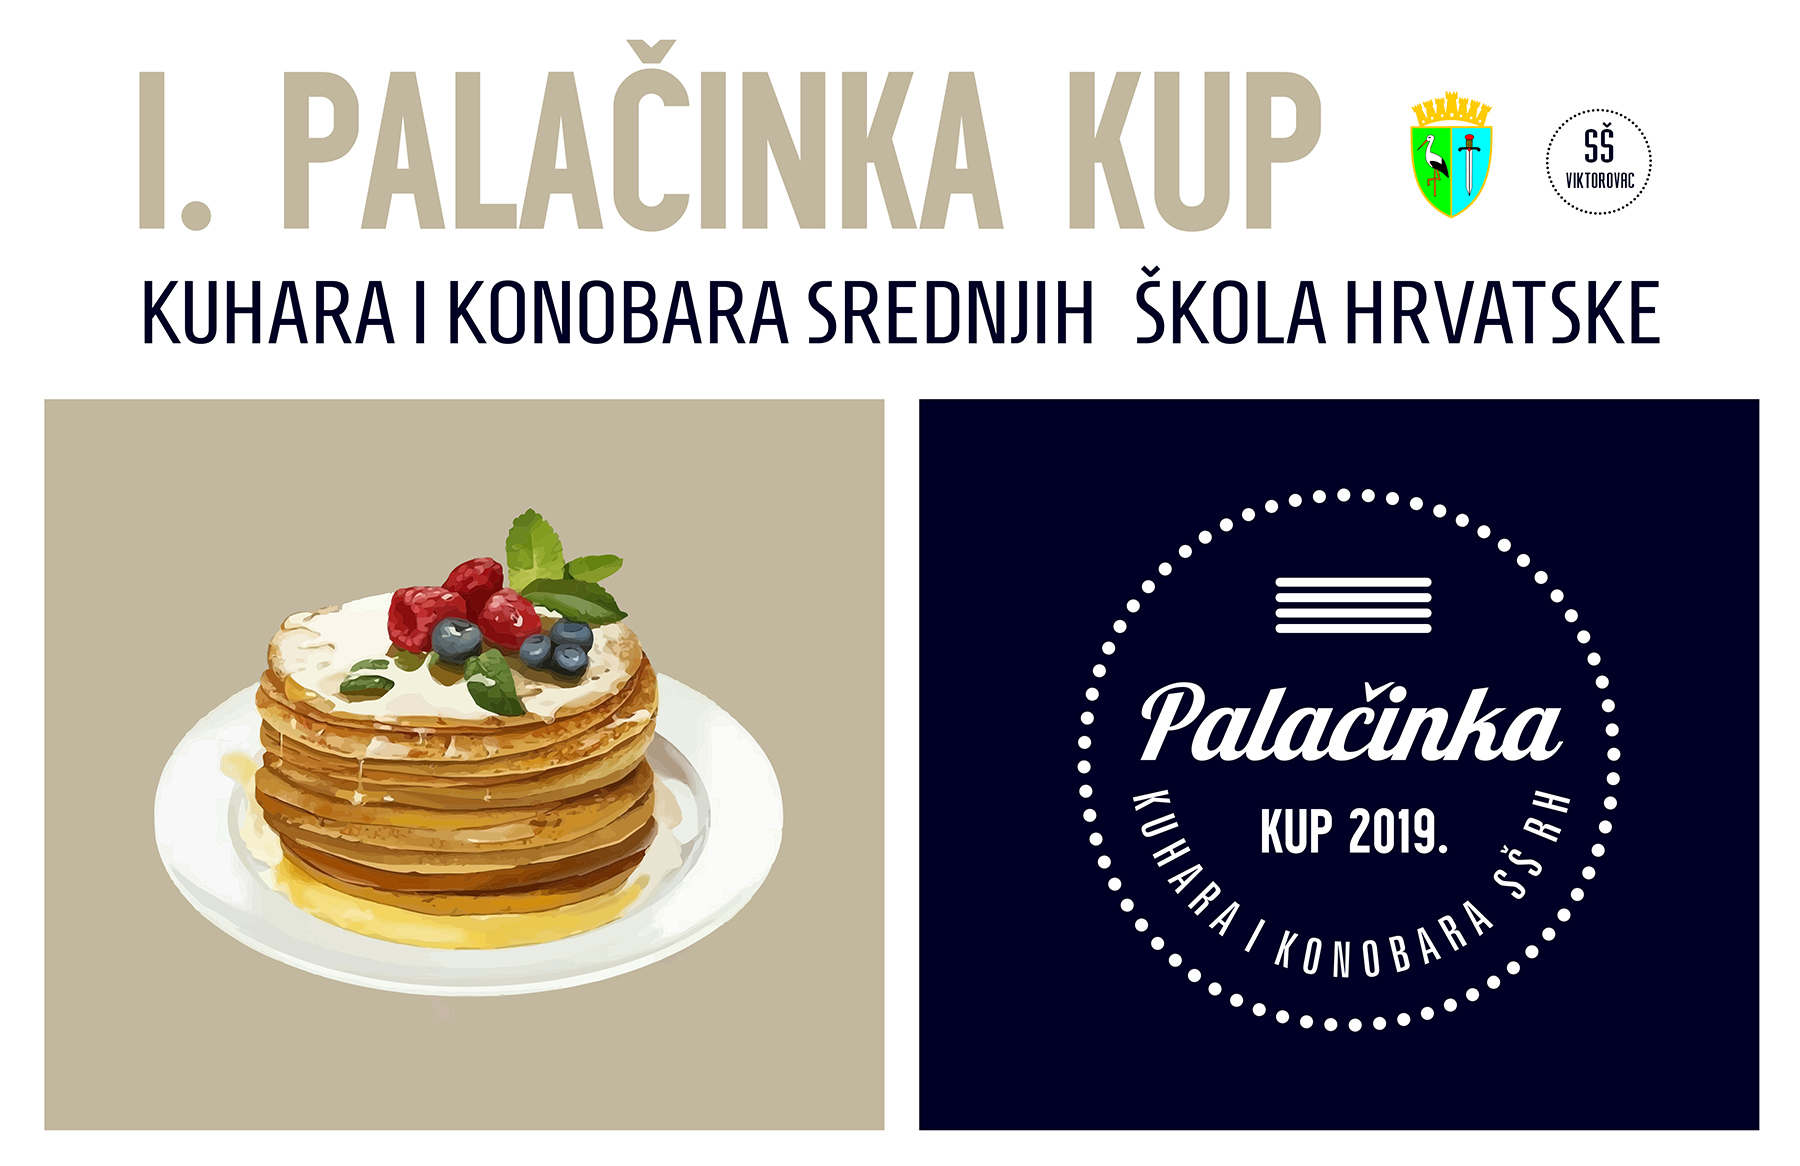 You are currently viewing Palačinka kup